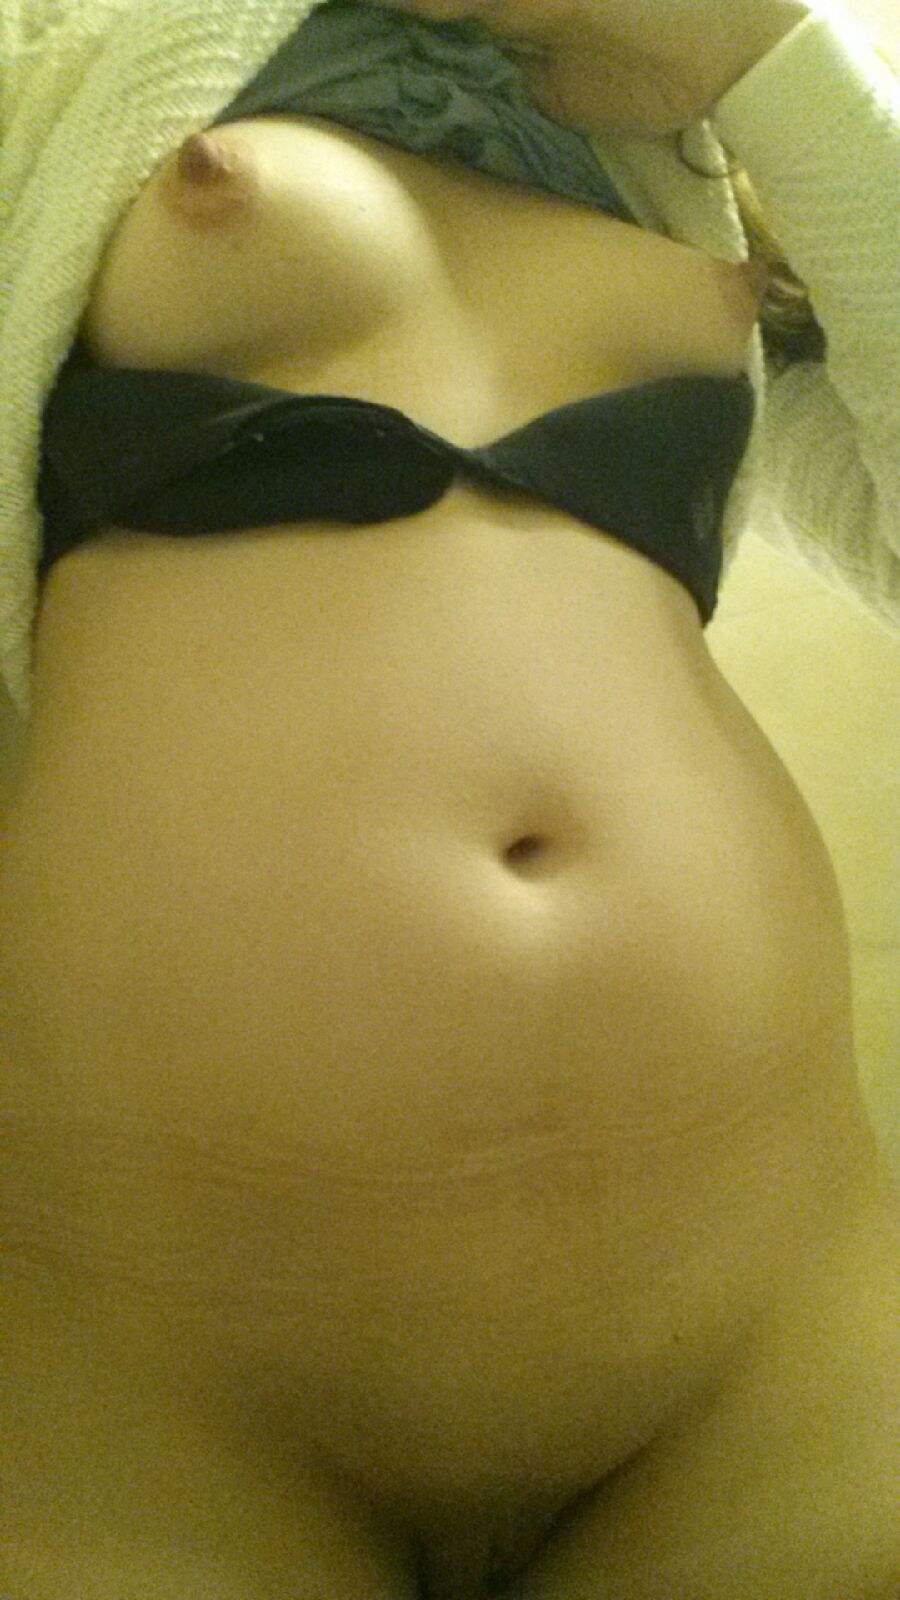 Horny at work...cum on my pic (f)or me?